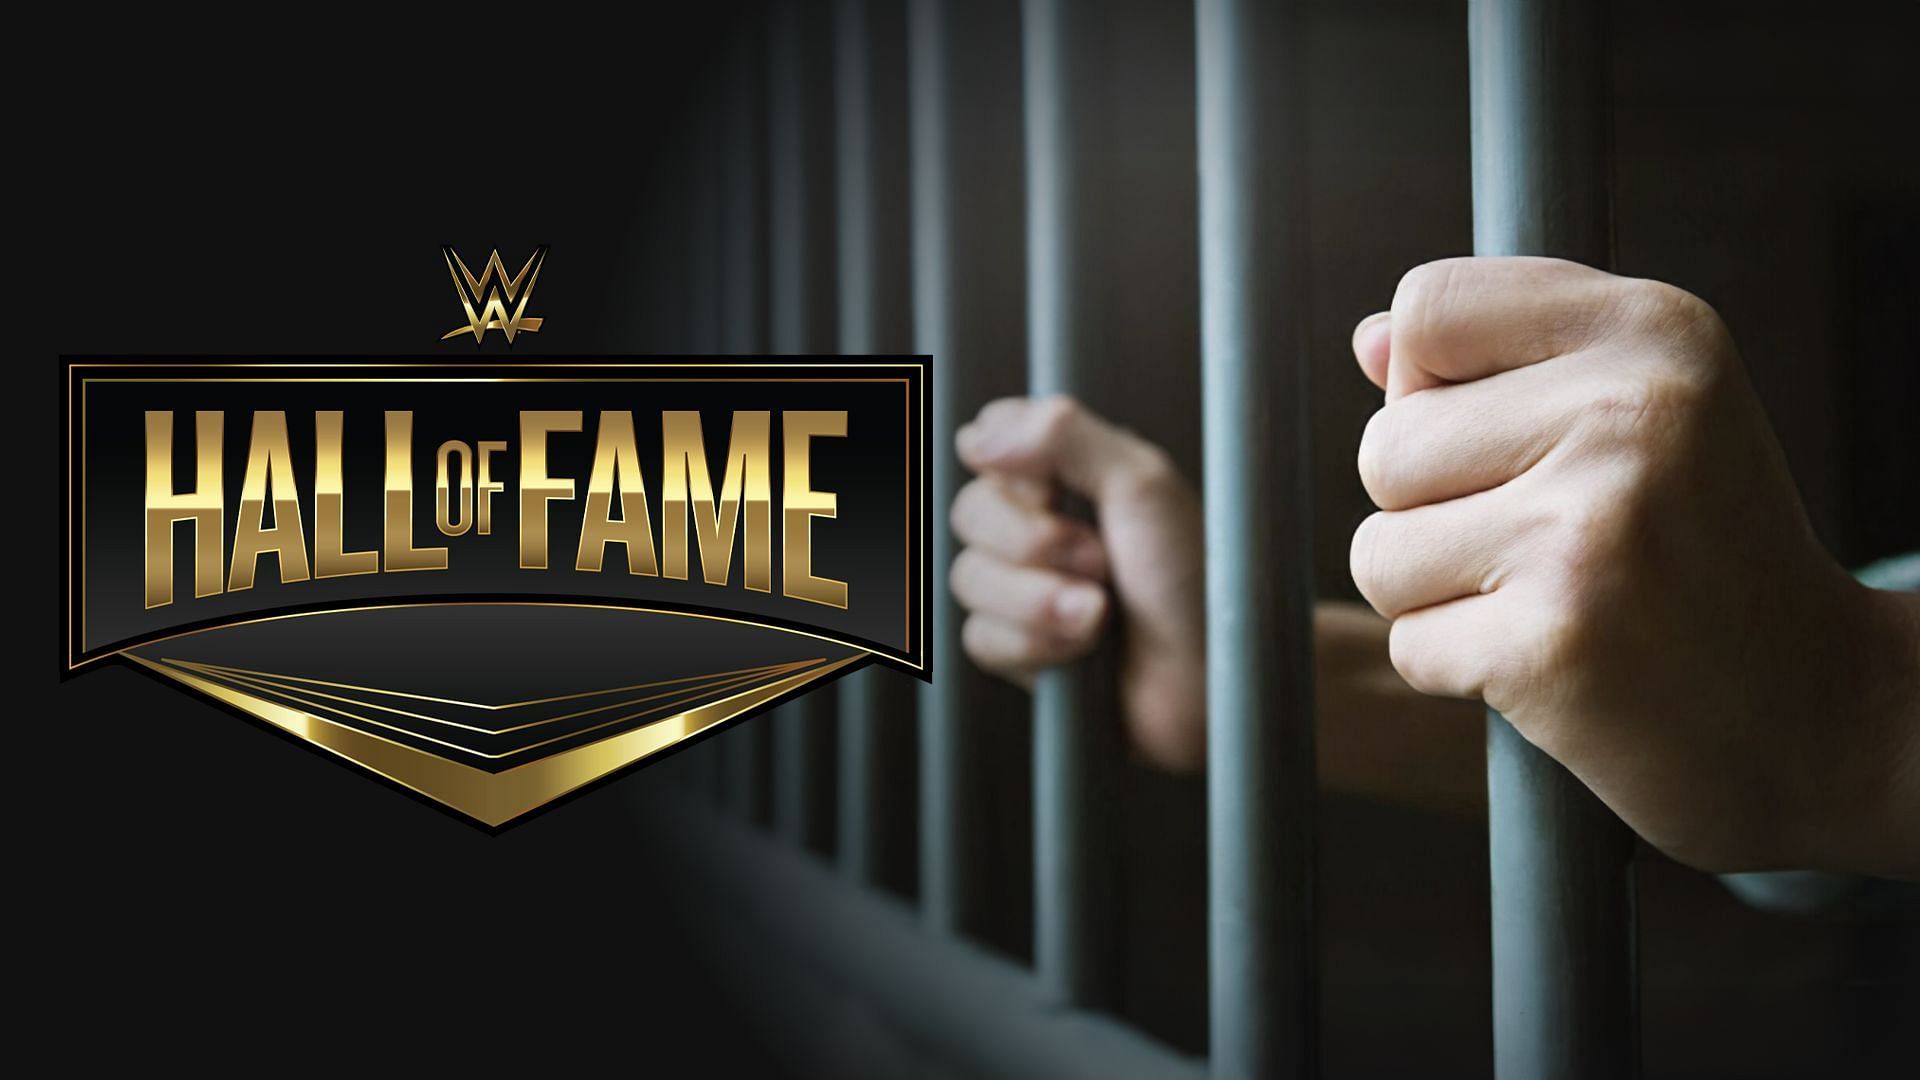 A WWE Hall of Famer is heading to prison